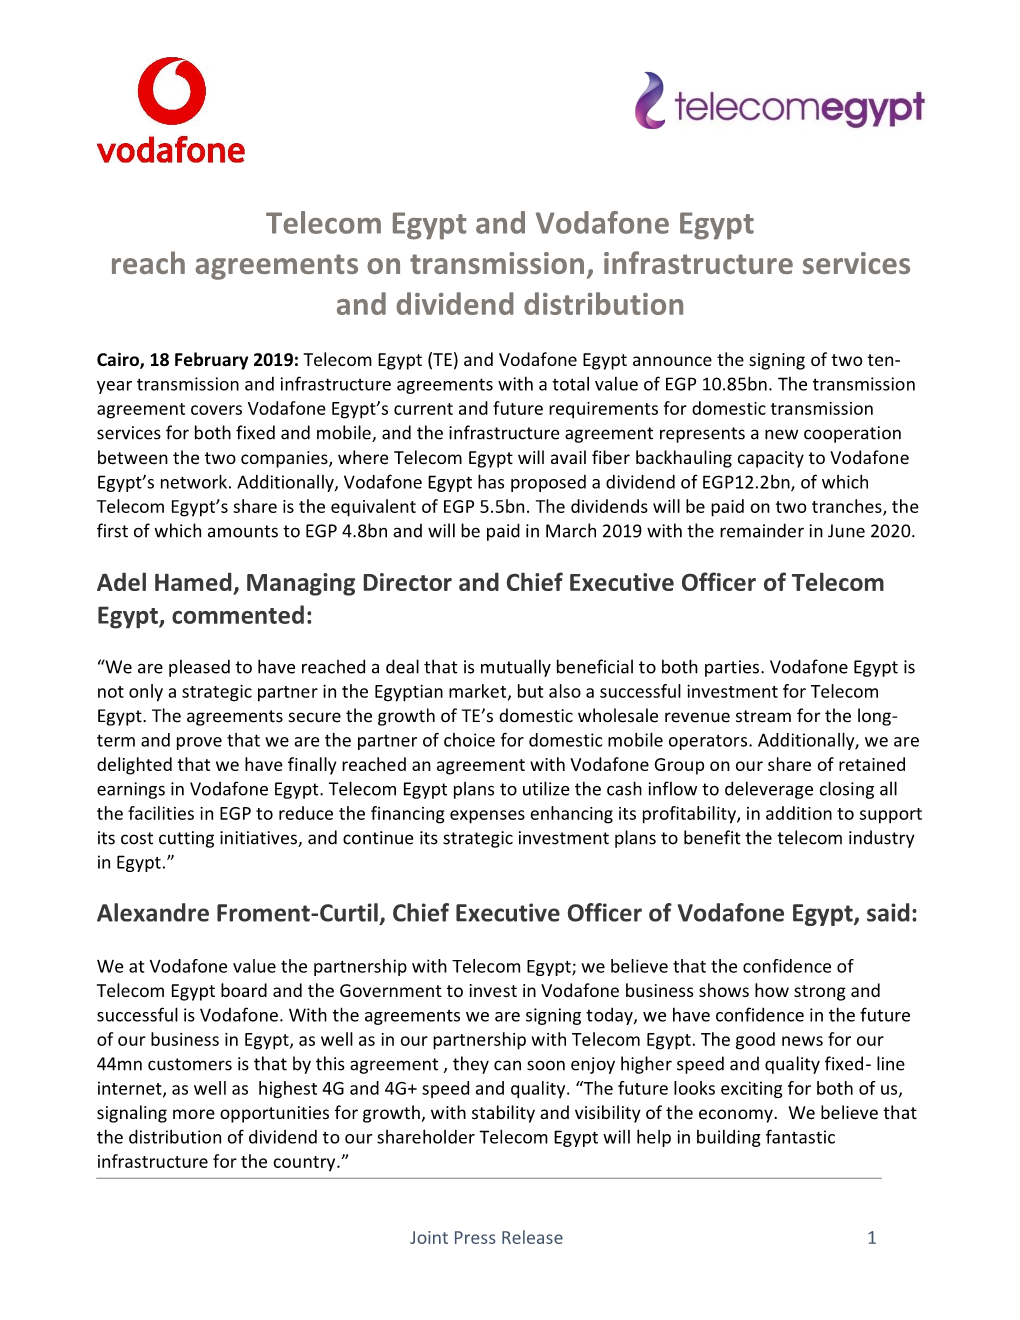 Telecom Egypt and Vodafone Egypt Reach Agreements on Transmission, Infrastructure Services and Dividend Distribution